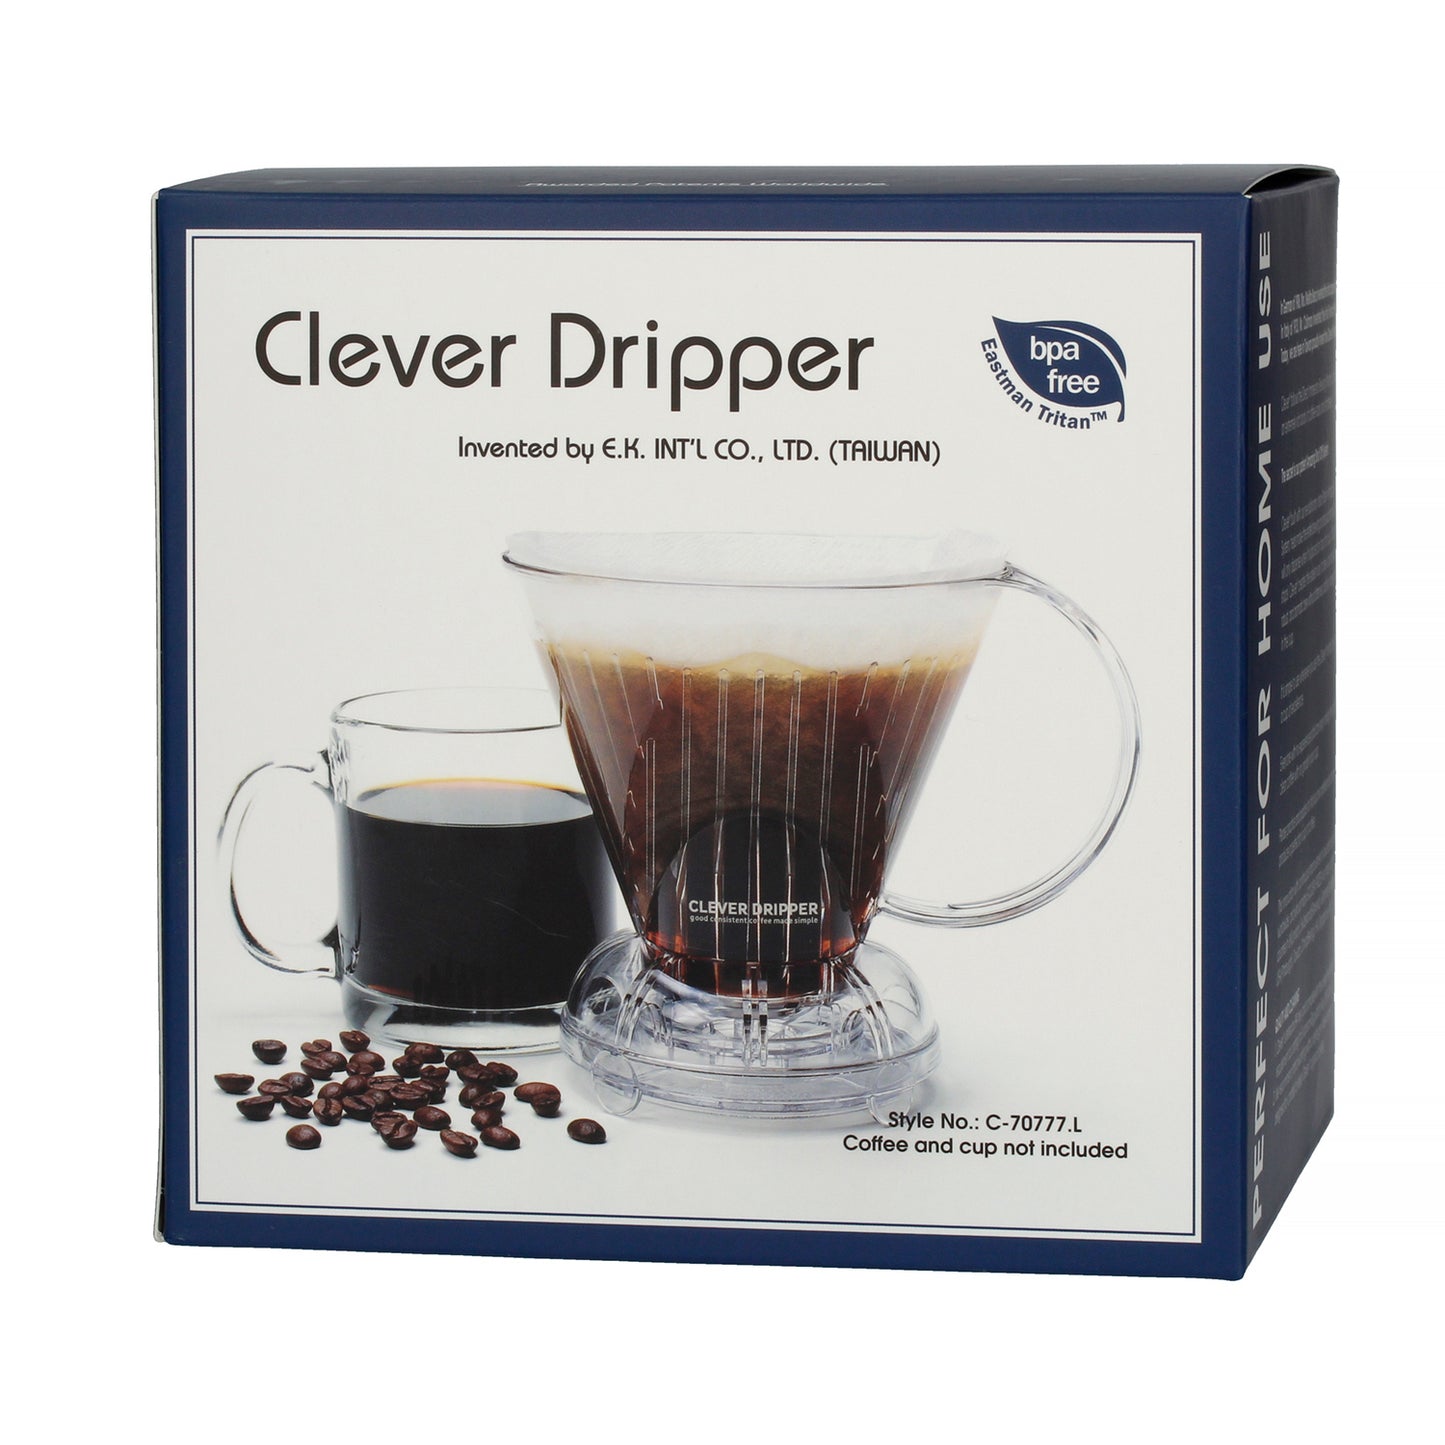 Mr. Clever Dripper - coffeetime.si